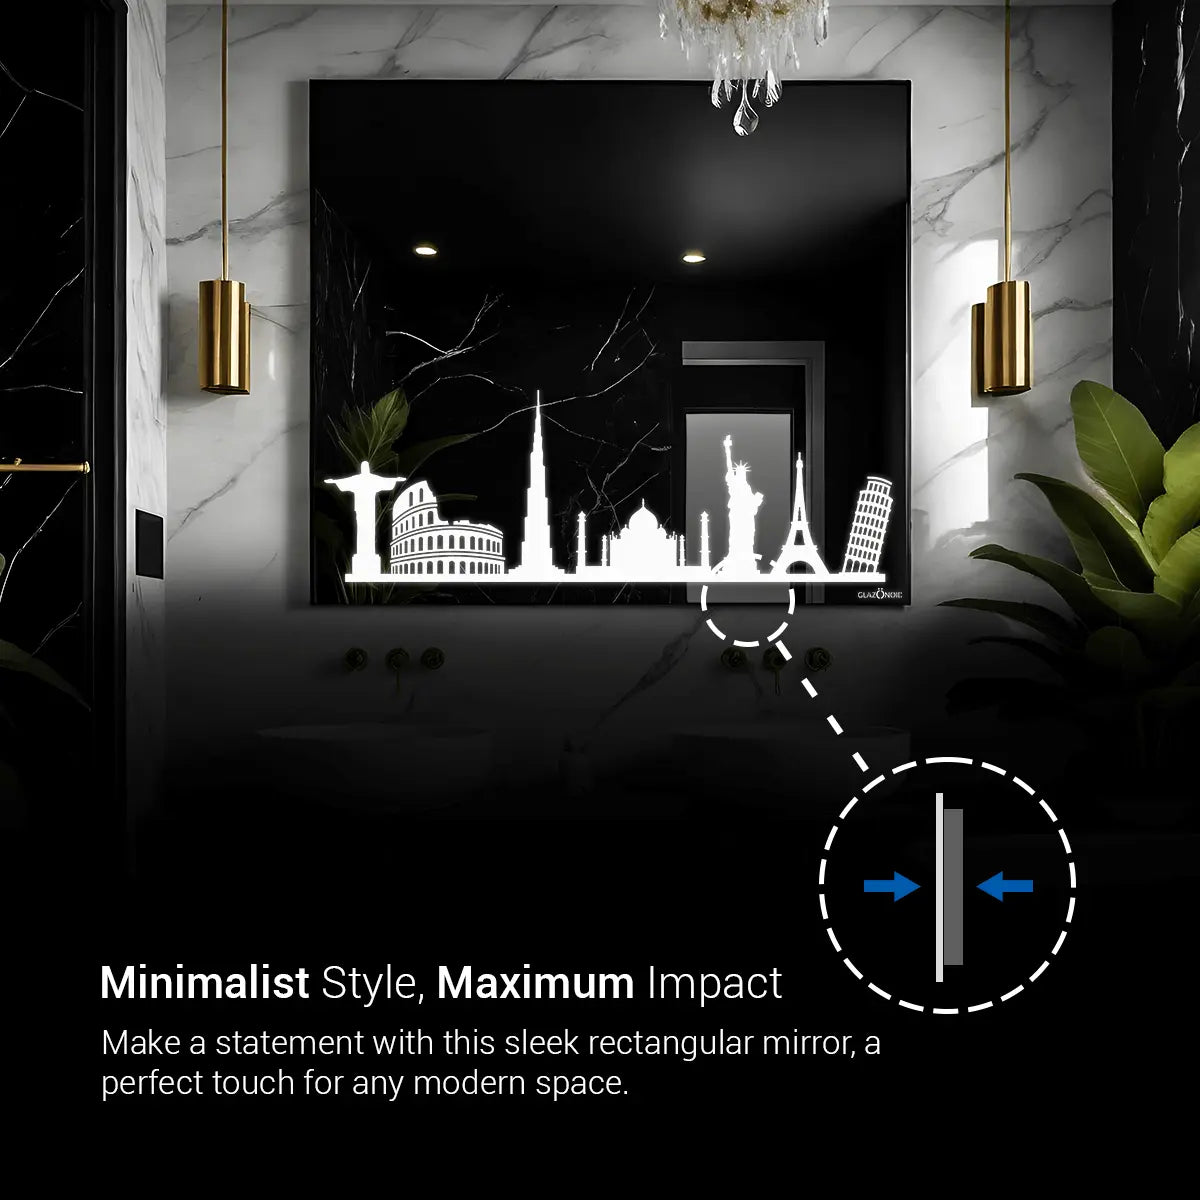 A sleek, rectangular bathroom LED mirror with a modern design. The mirror features a black silhouette of a city skyline etched onto the bottom portion. This mirror would be a perfect touch for any modern bathroom.